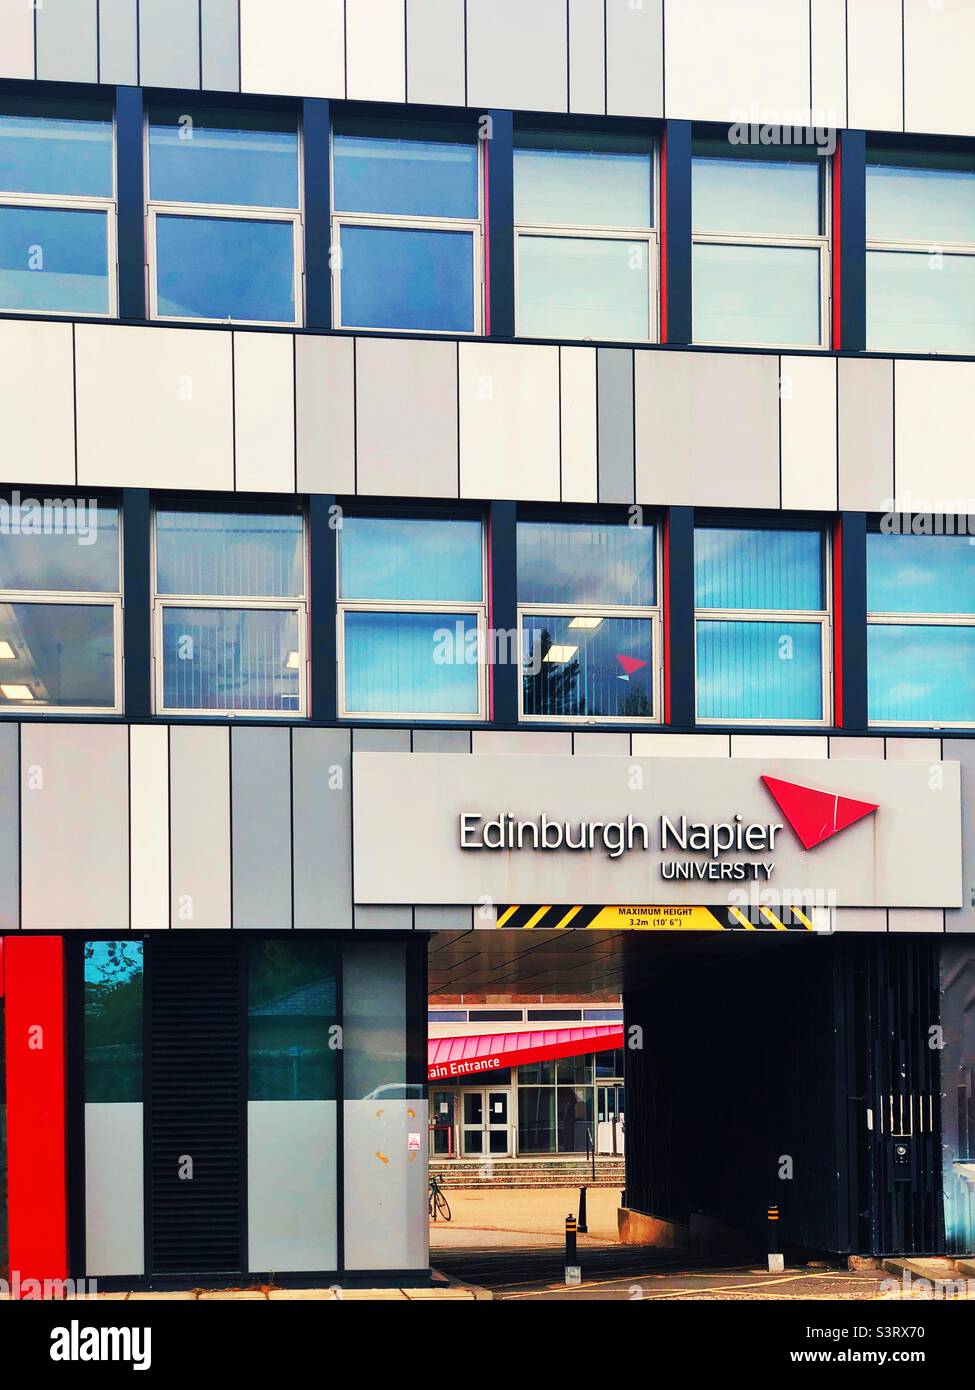 Edinburgh Napier University Merchiston campus. It is home to the Arts and Creative industries, computing and engineering. Stock Photo